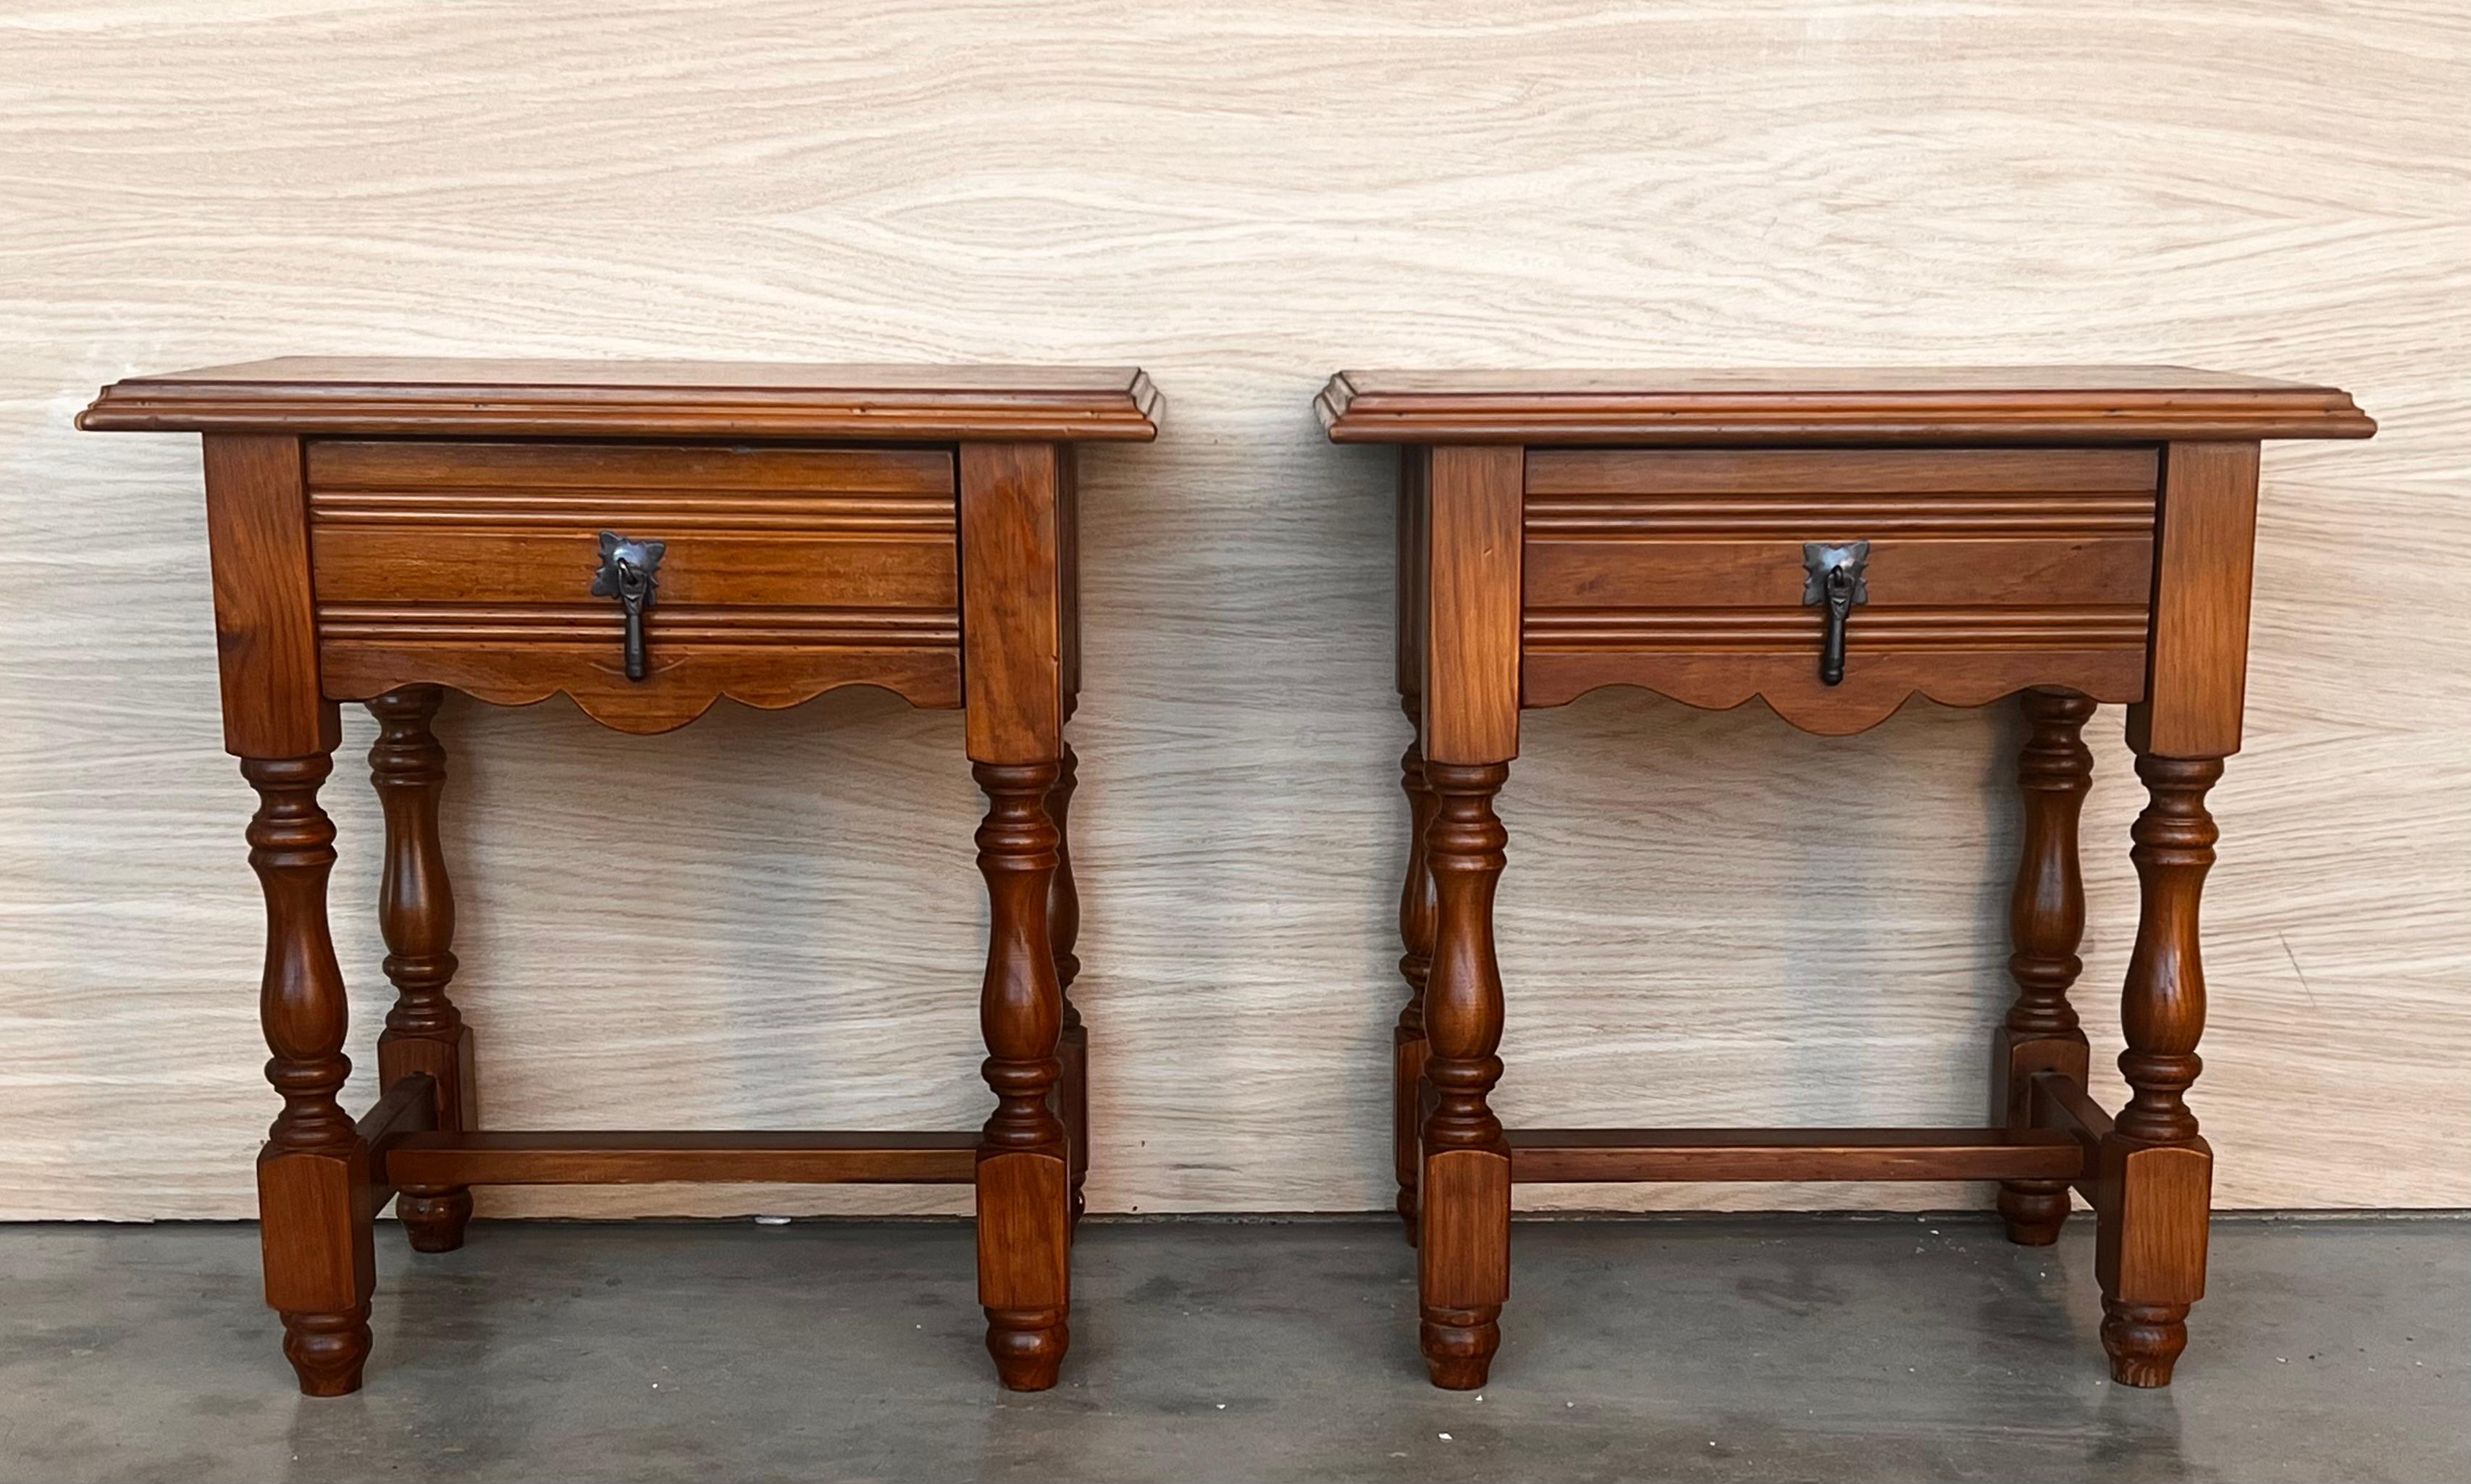 20th century Pair of Spanish nightstands with one drawer . The table has beautiful carved drawers with original color contrast. Beautiful tables that you can use like a nightstands or side tables, end tables or table lamp, desk or console.